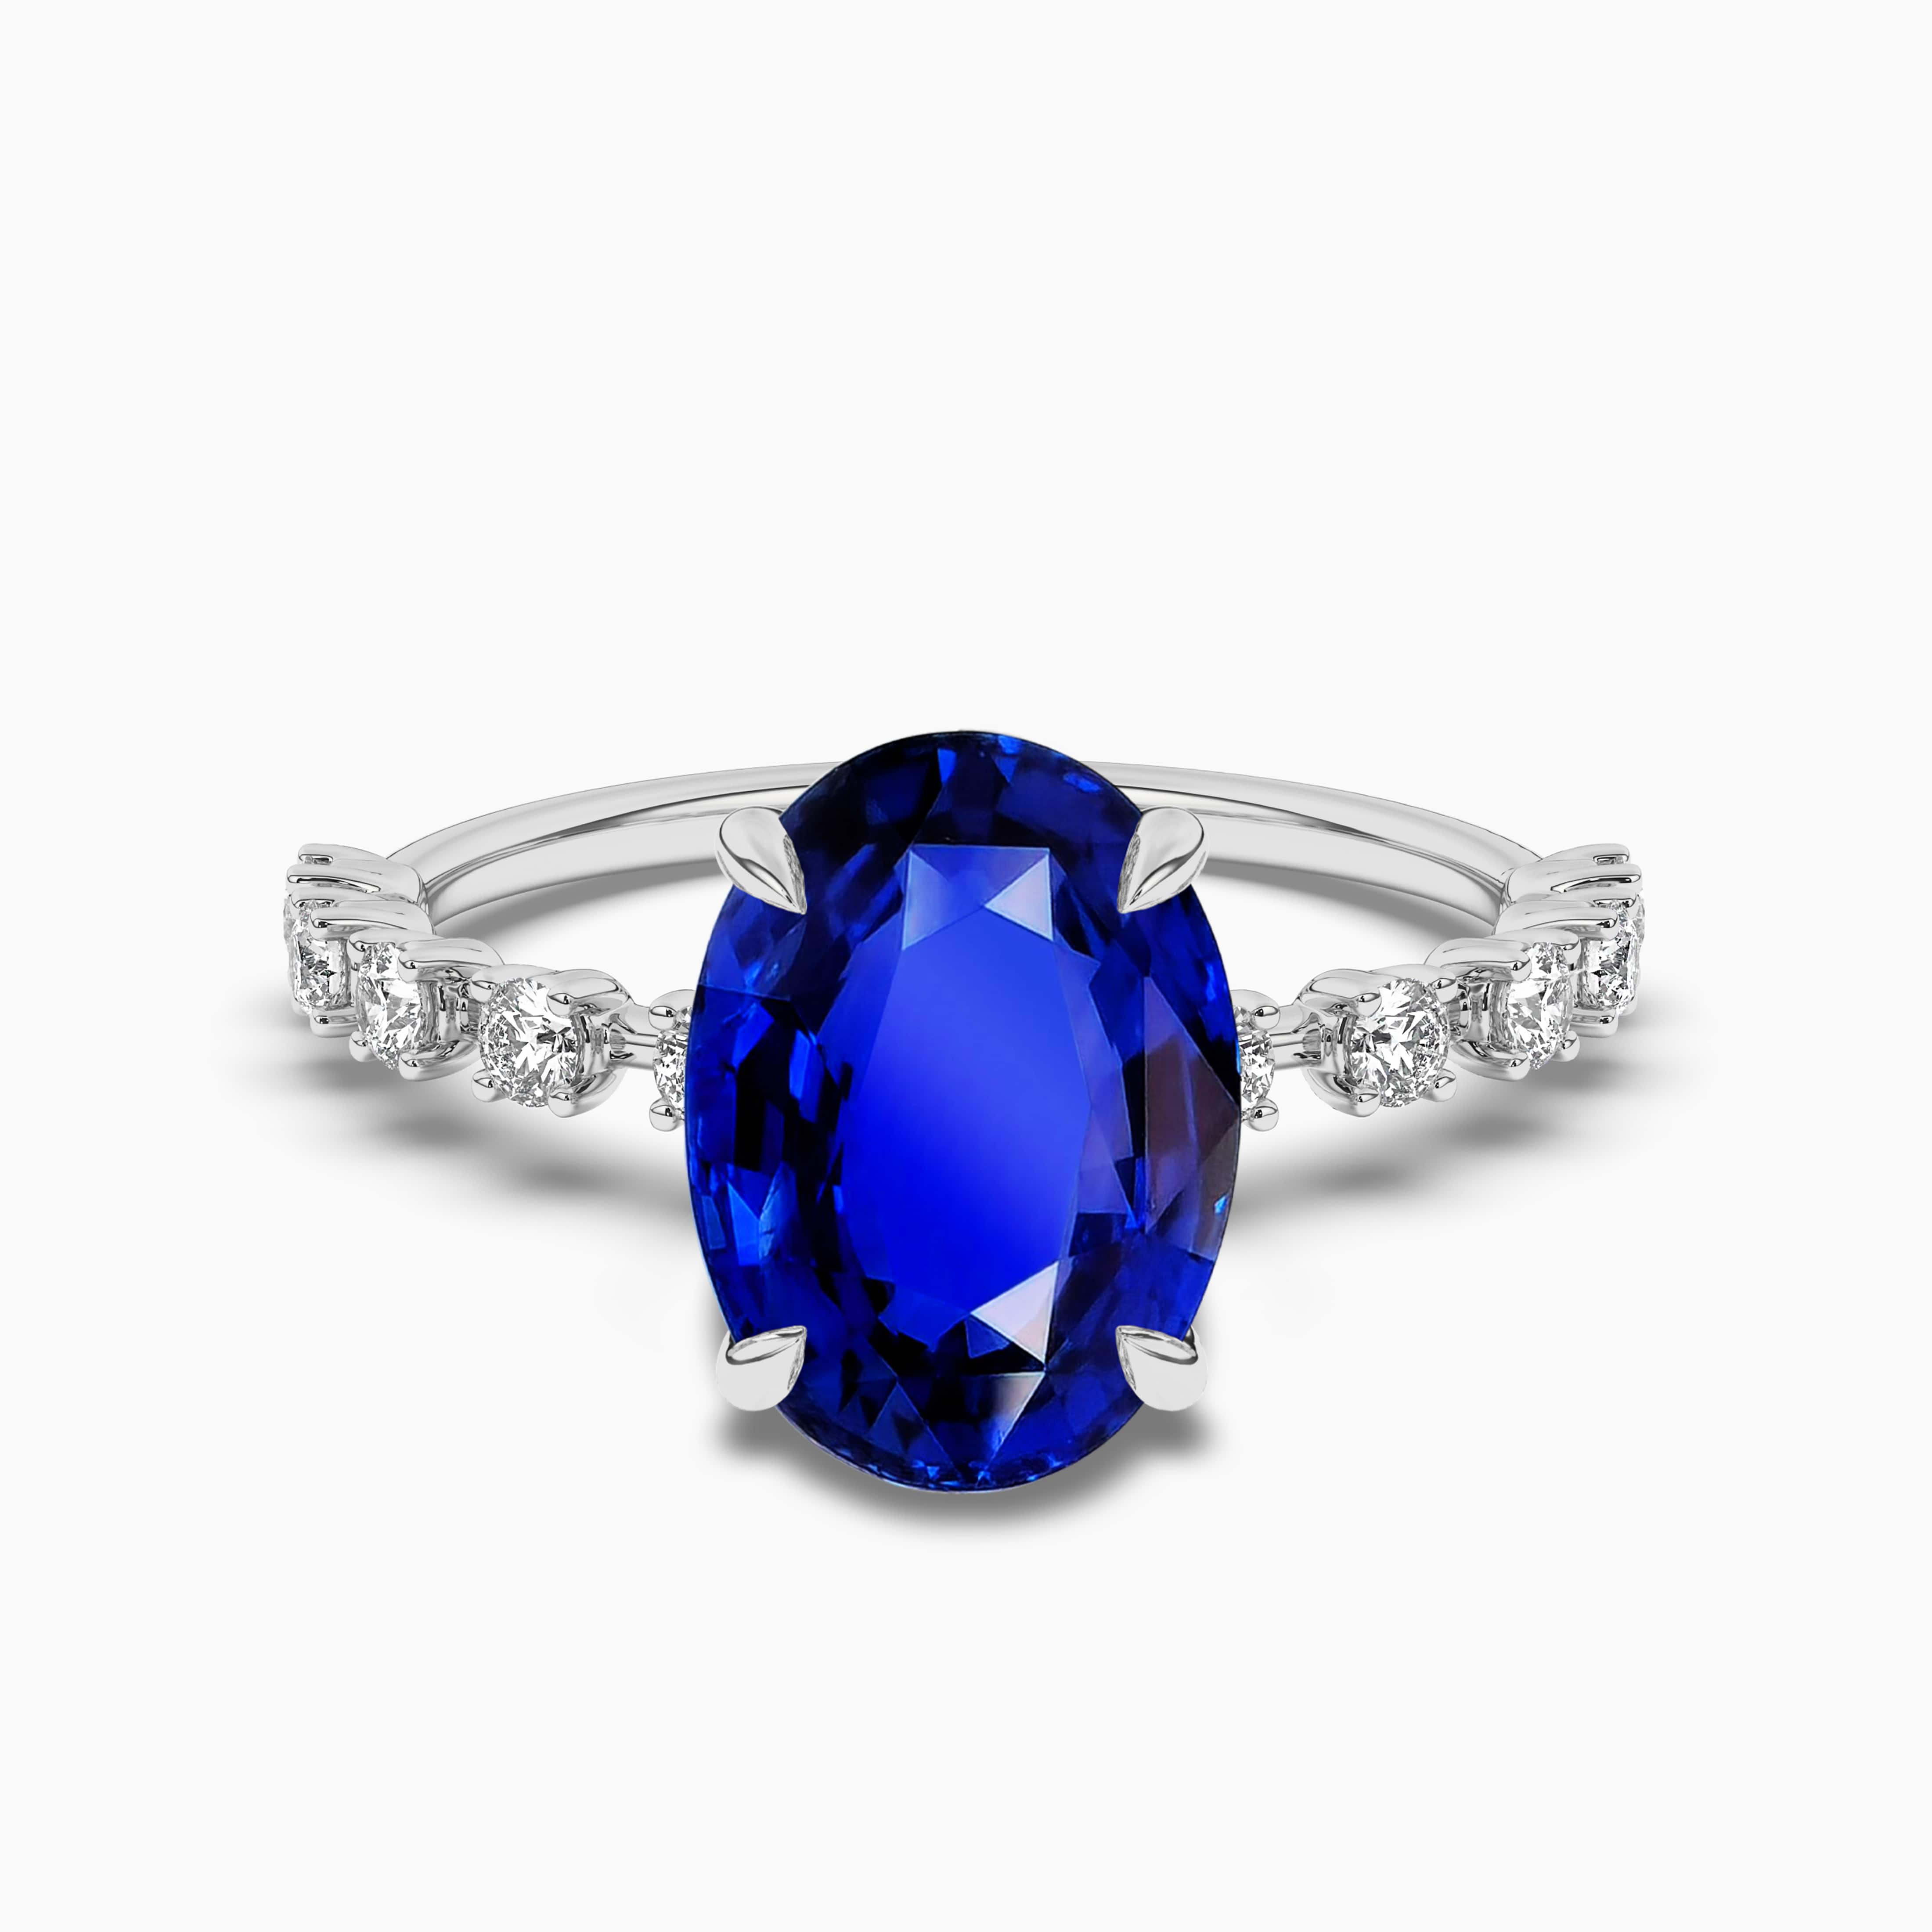 OVAL CUT BLUE SAPPHIRE GEMSTONE RING WITH ROUND DIAMOND ACCENTS IN WHITE GOLD